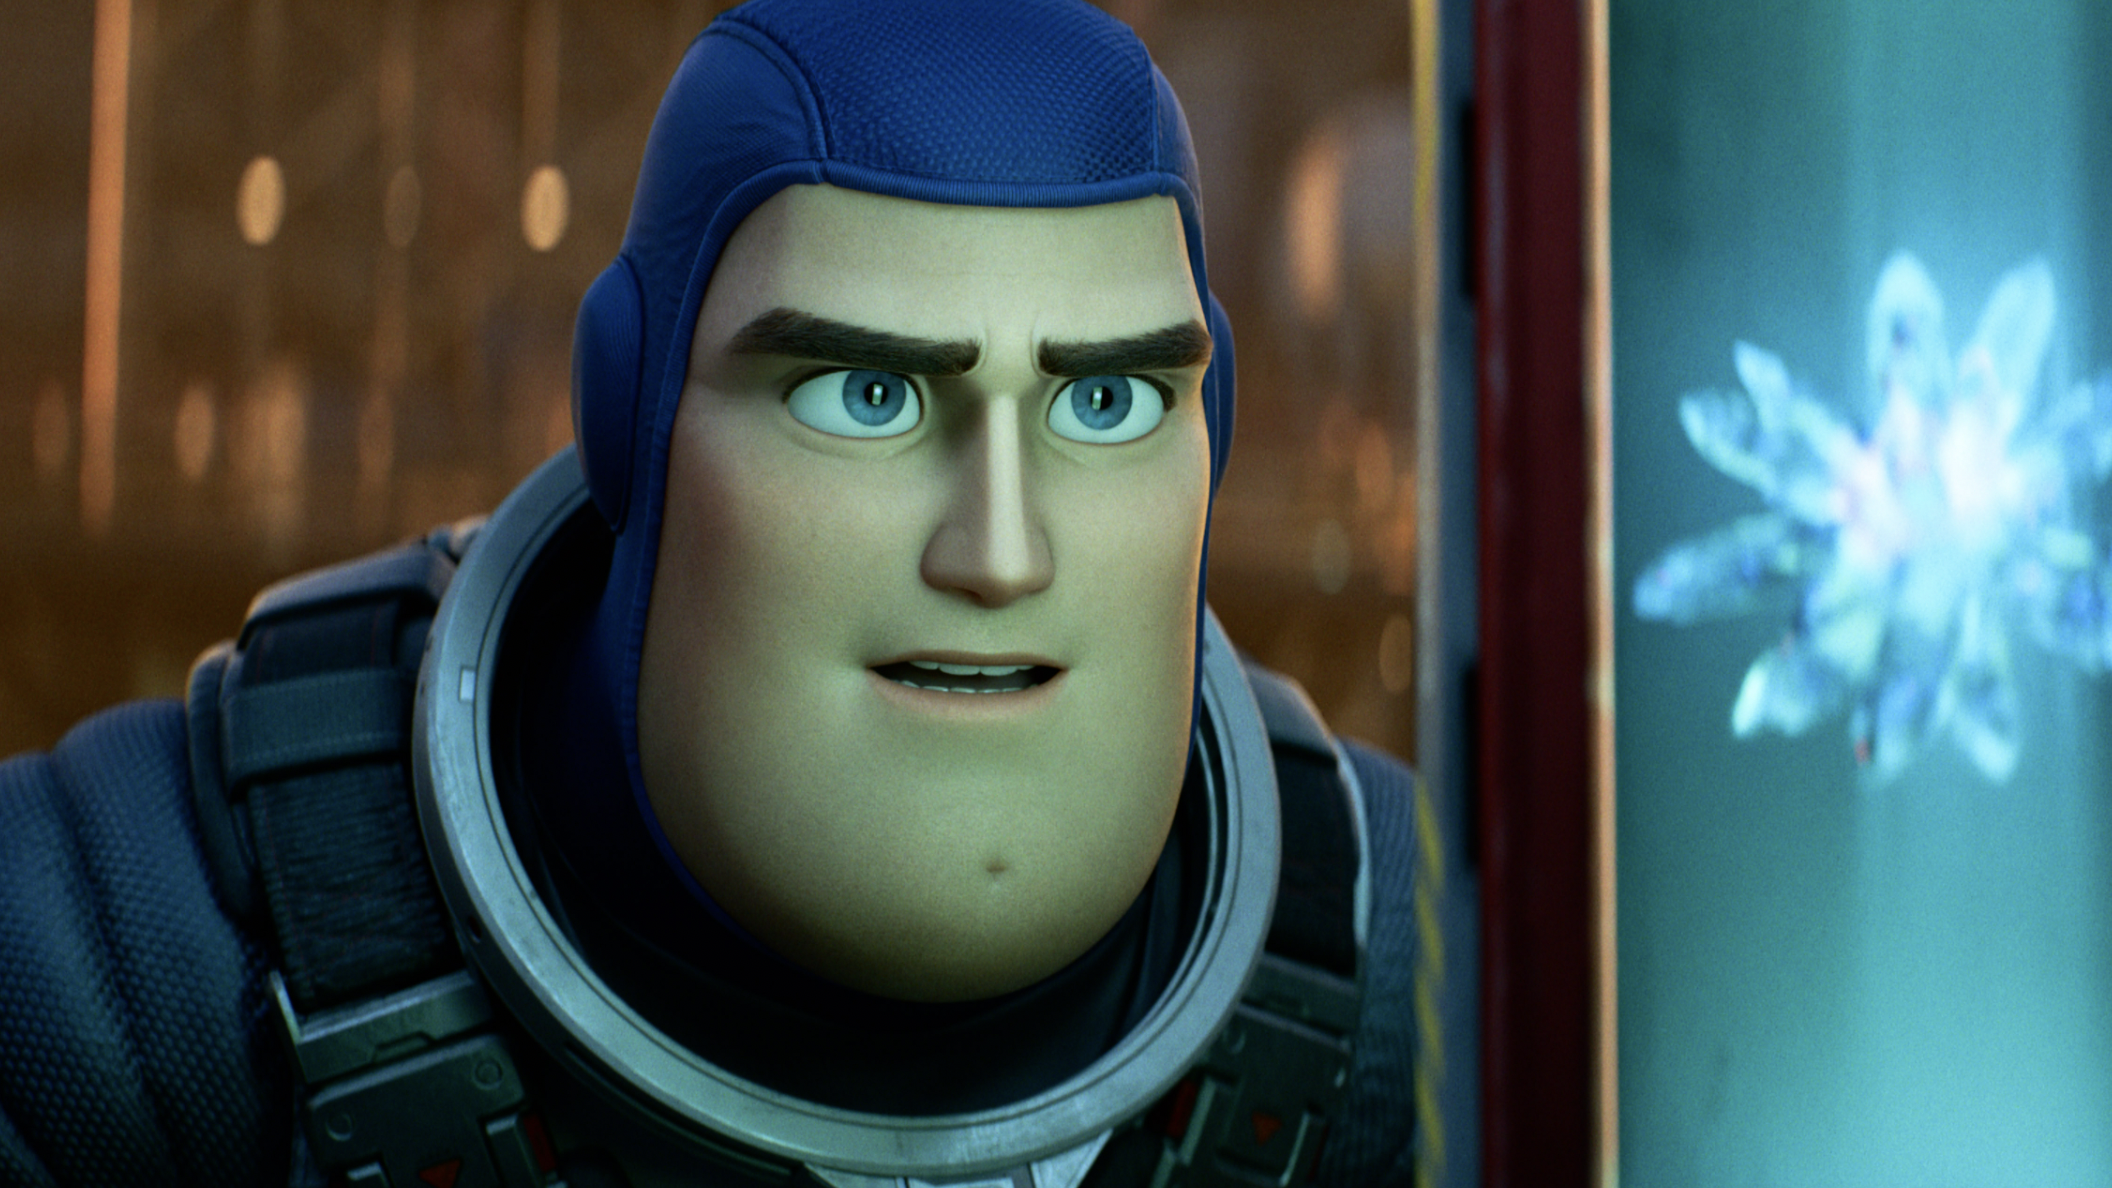 There's a Wild Connection Between Disney's Buzz Lightyear Movie